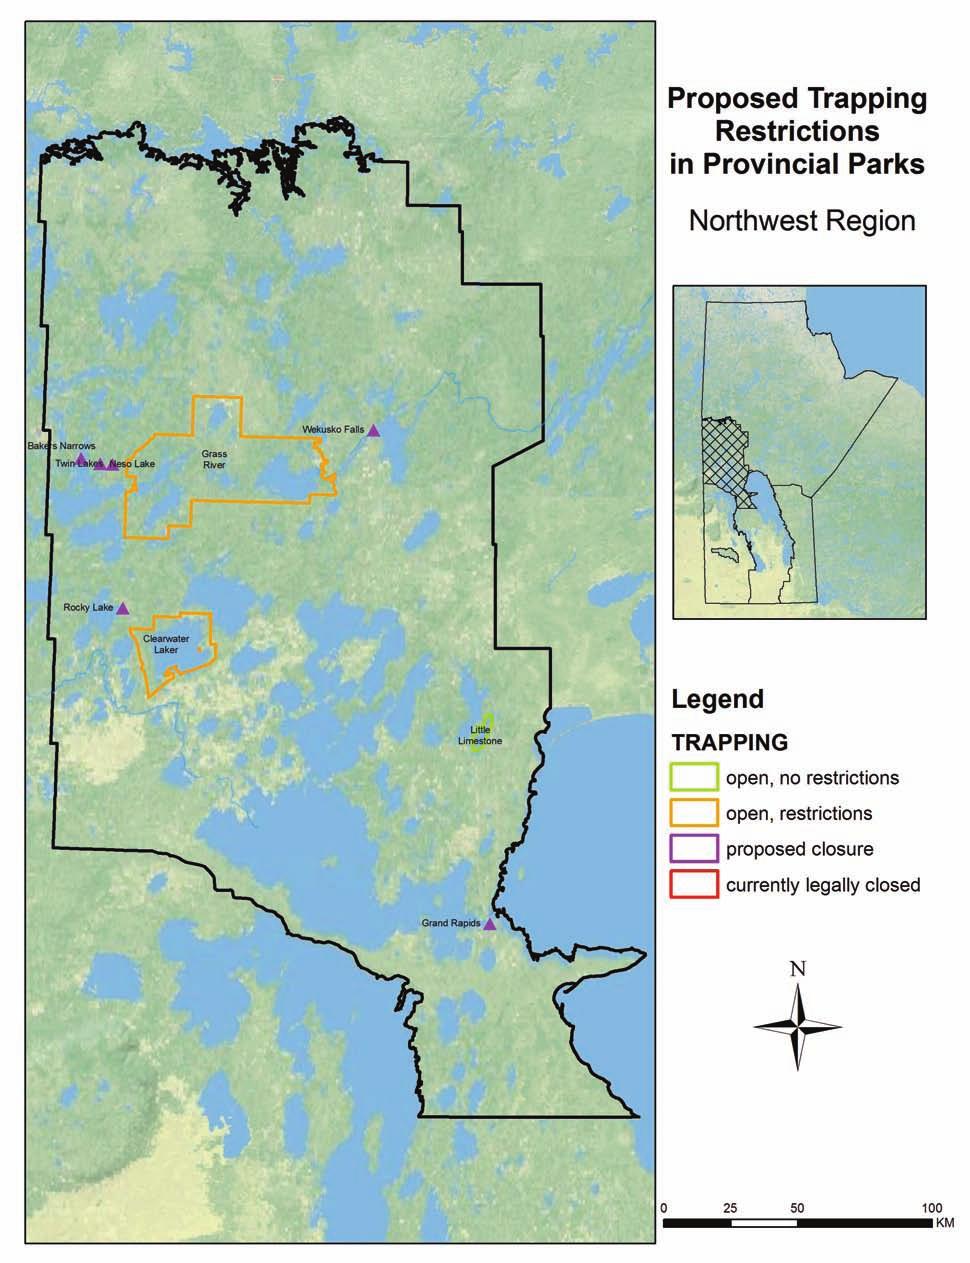 Proposed Trapping Restrictions in Provincial Parks NORTHWEST